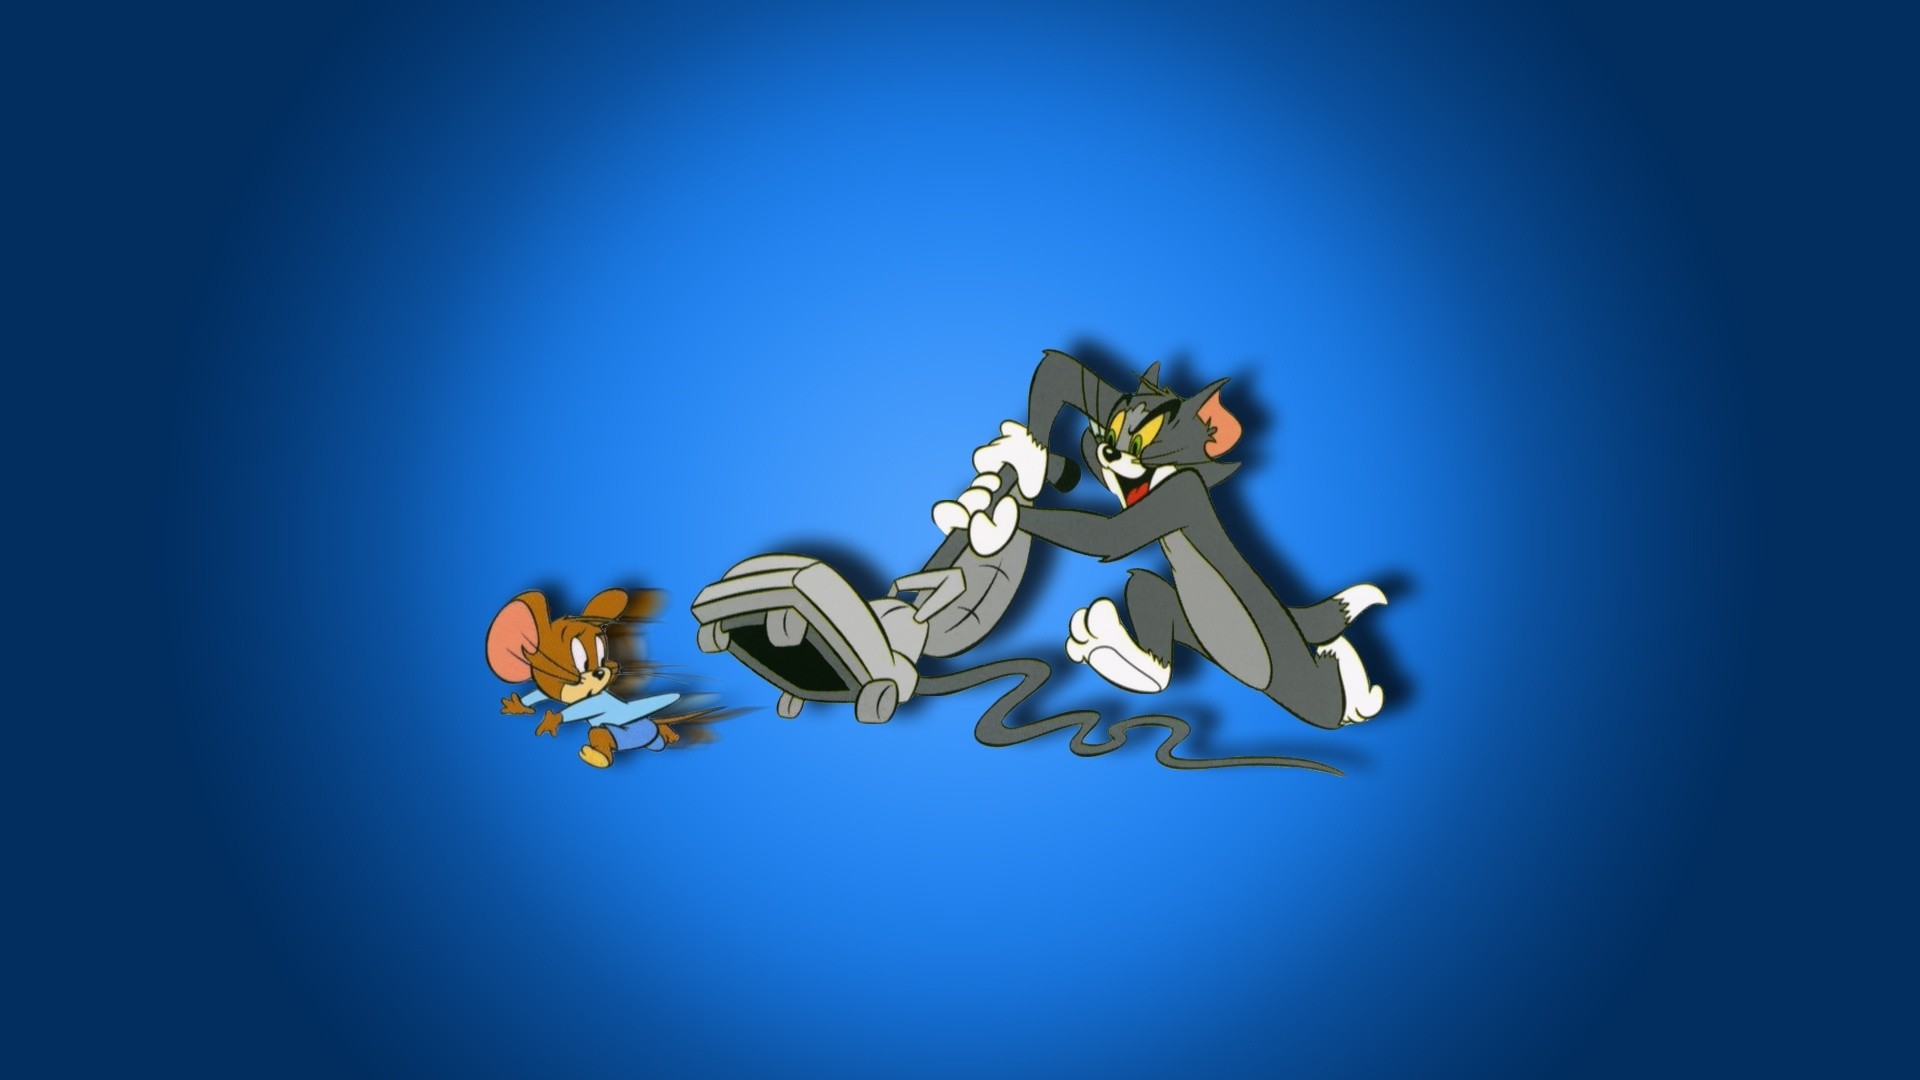 1920x1080 Tom And Jerry Hd Wallpaper